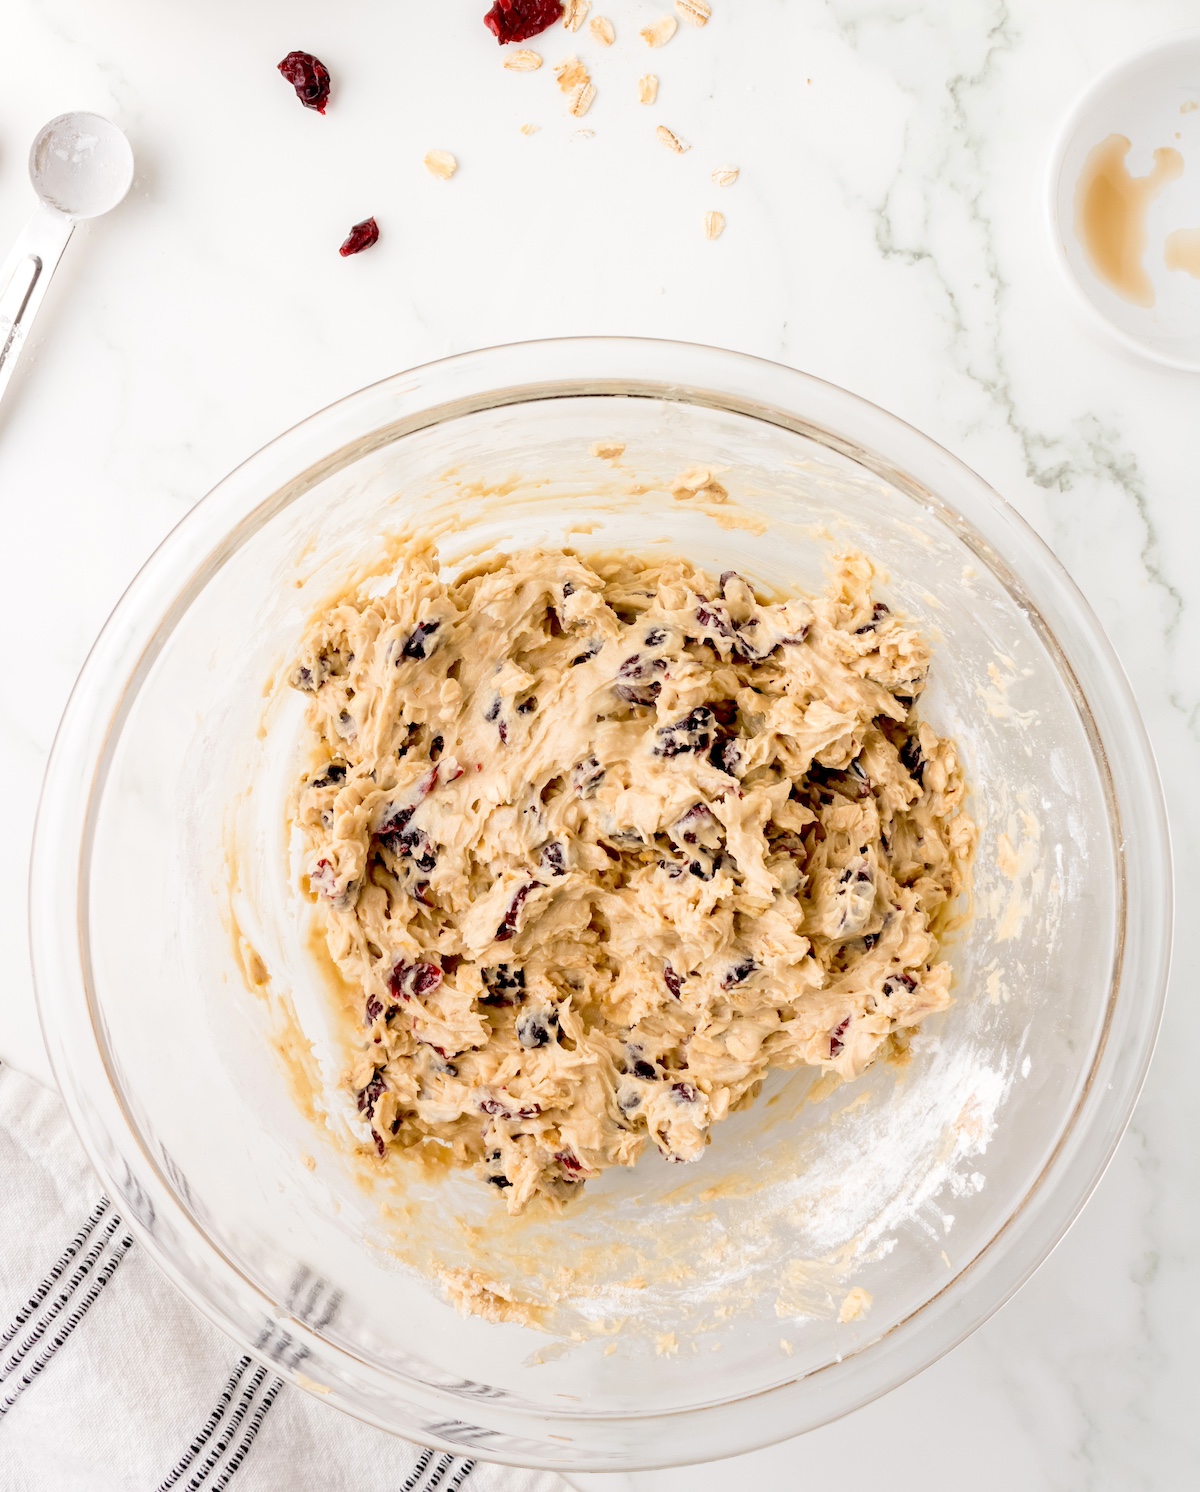 Cranberry cookie dough ready to be chilled in the fridge